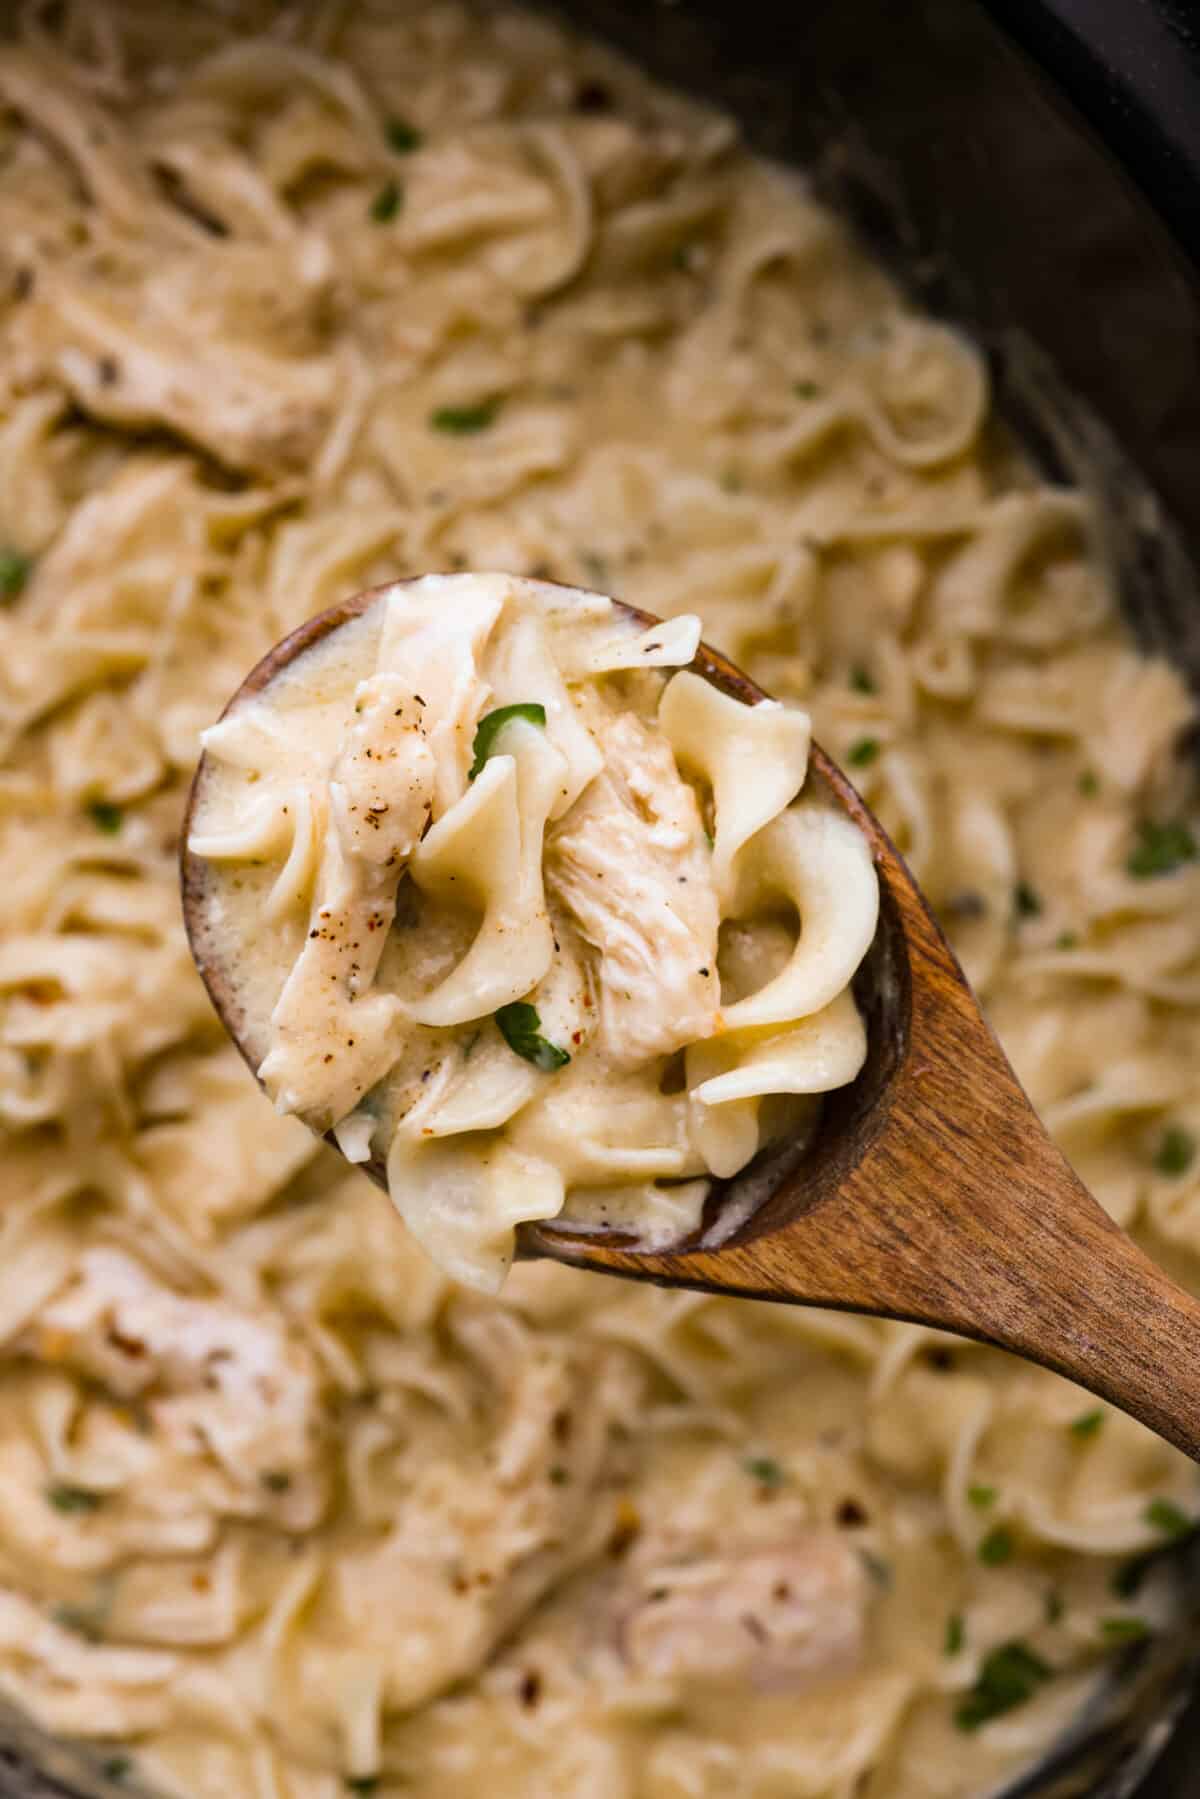 Chicken and noodles in a wooden spoon.